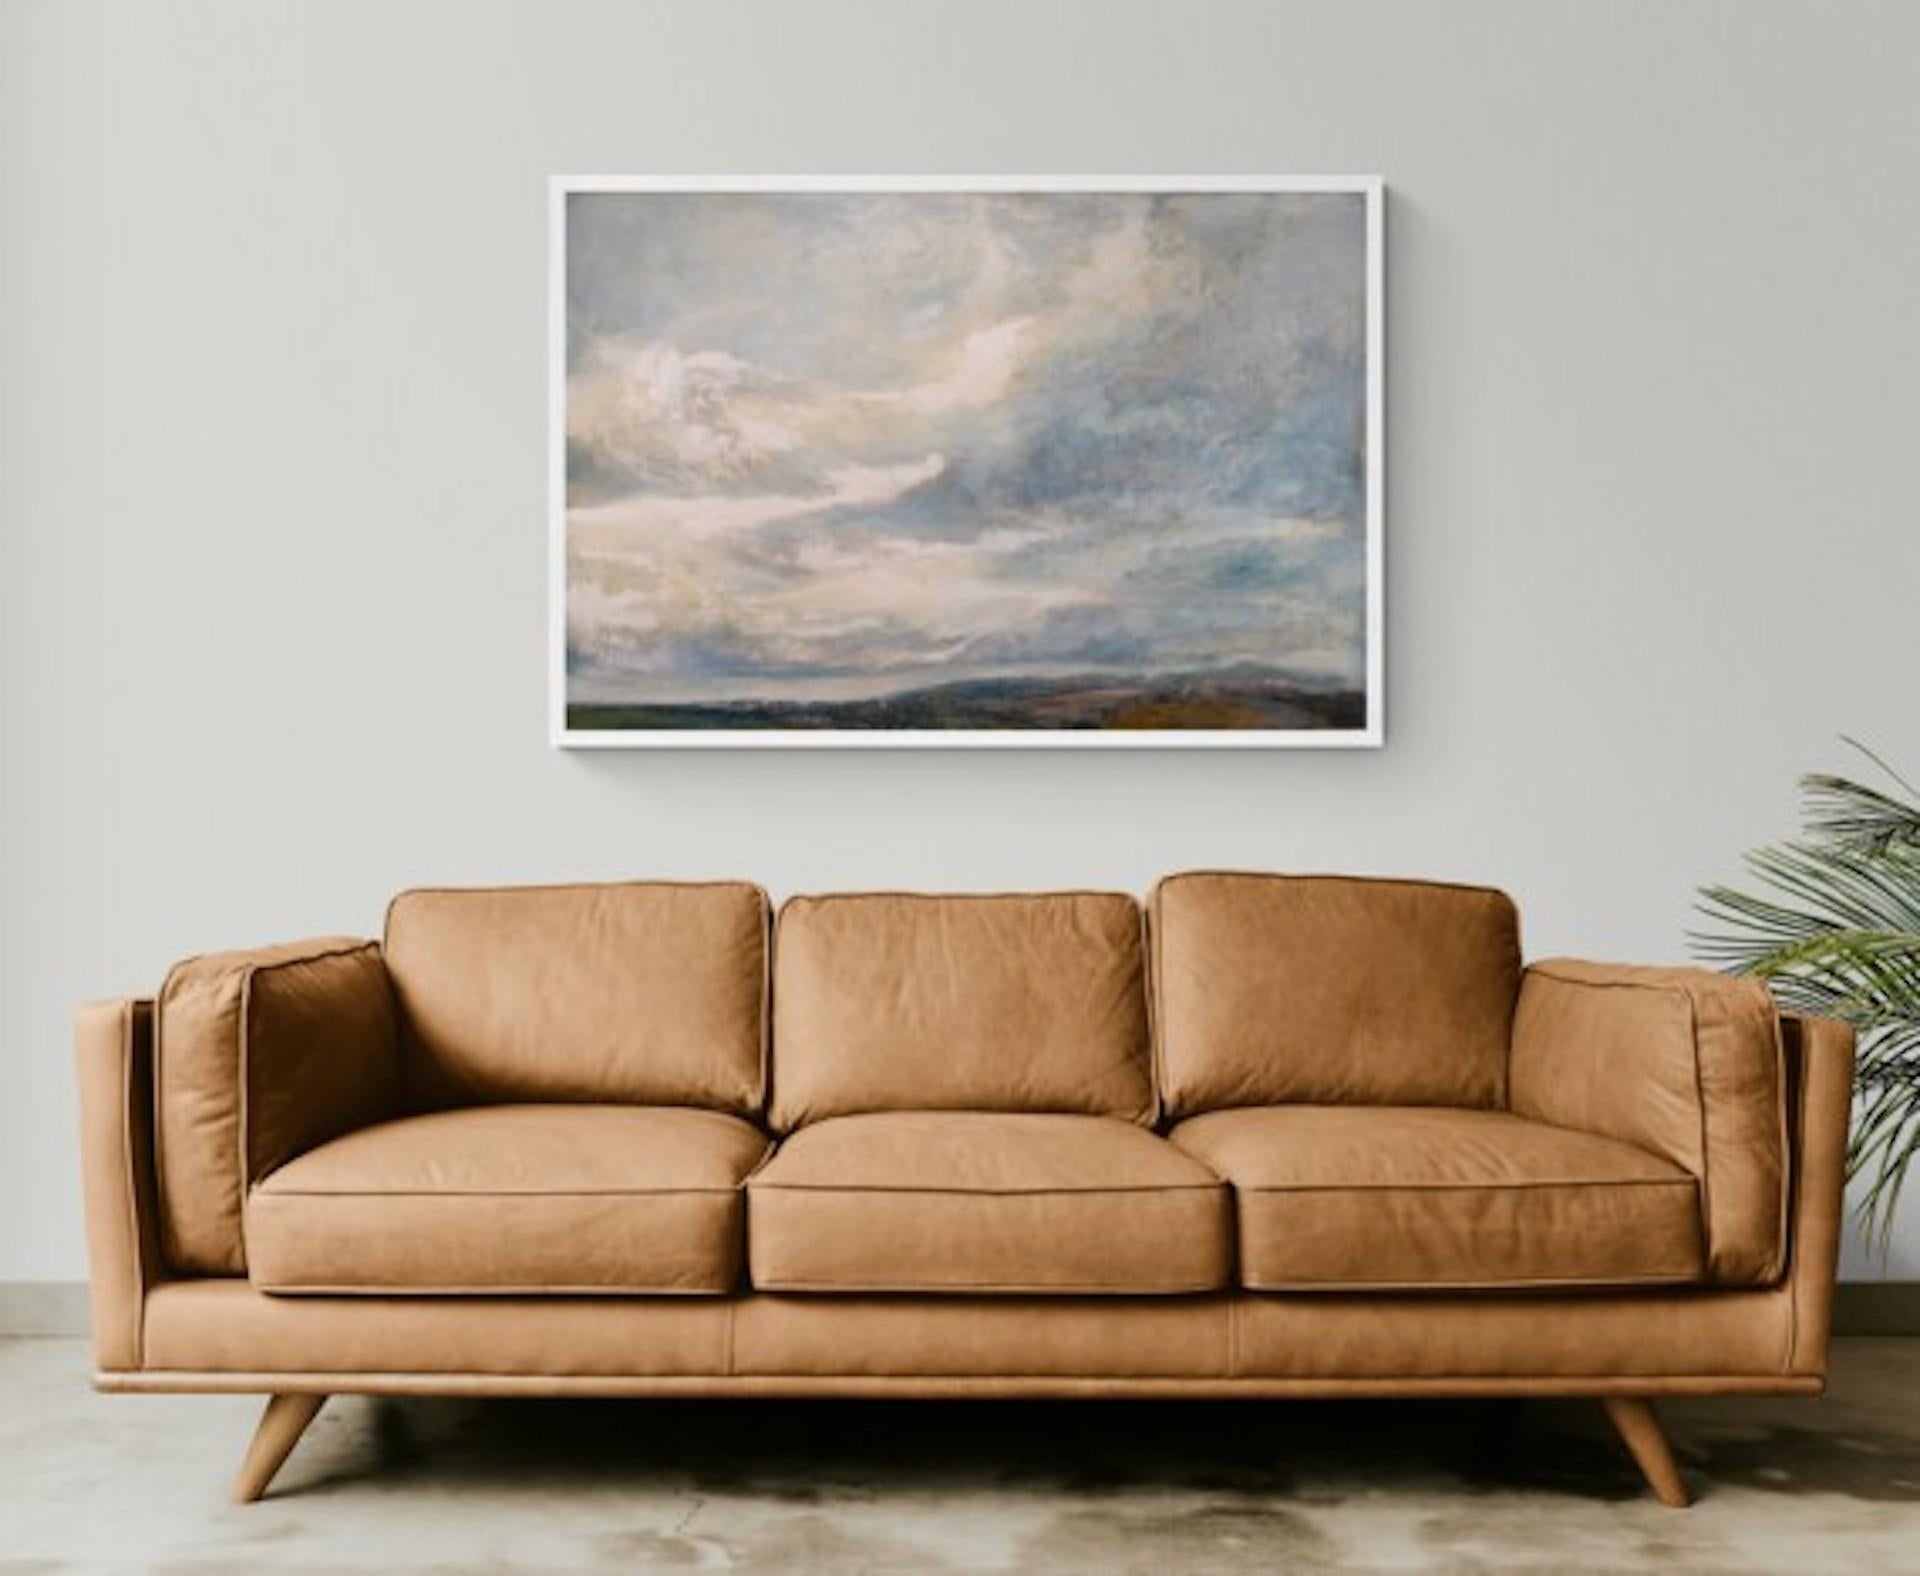 Chromatic Grey Skies, Atmospheric Skyscape Painting, Large Realist Statement Art - Brown Landscape Painting by Alex McIntyre 